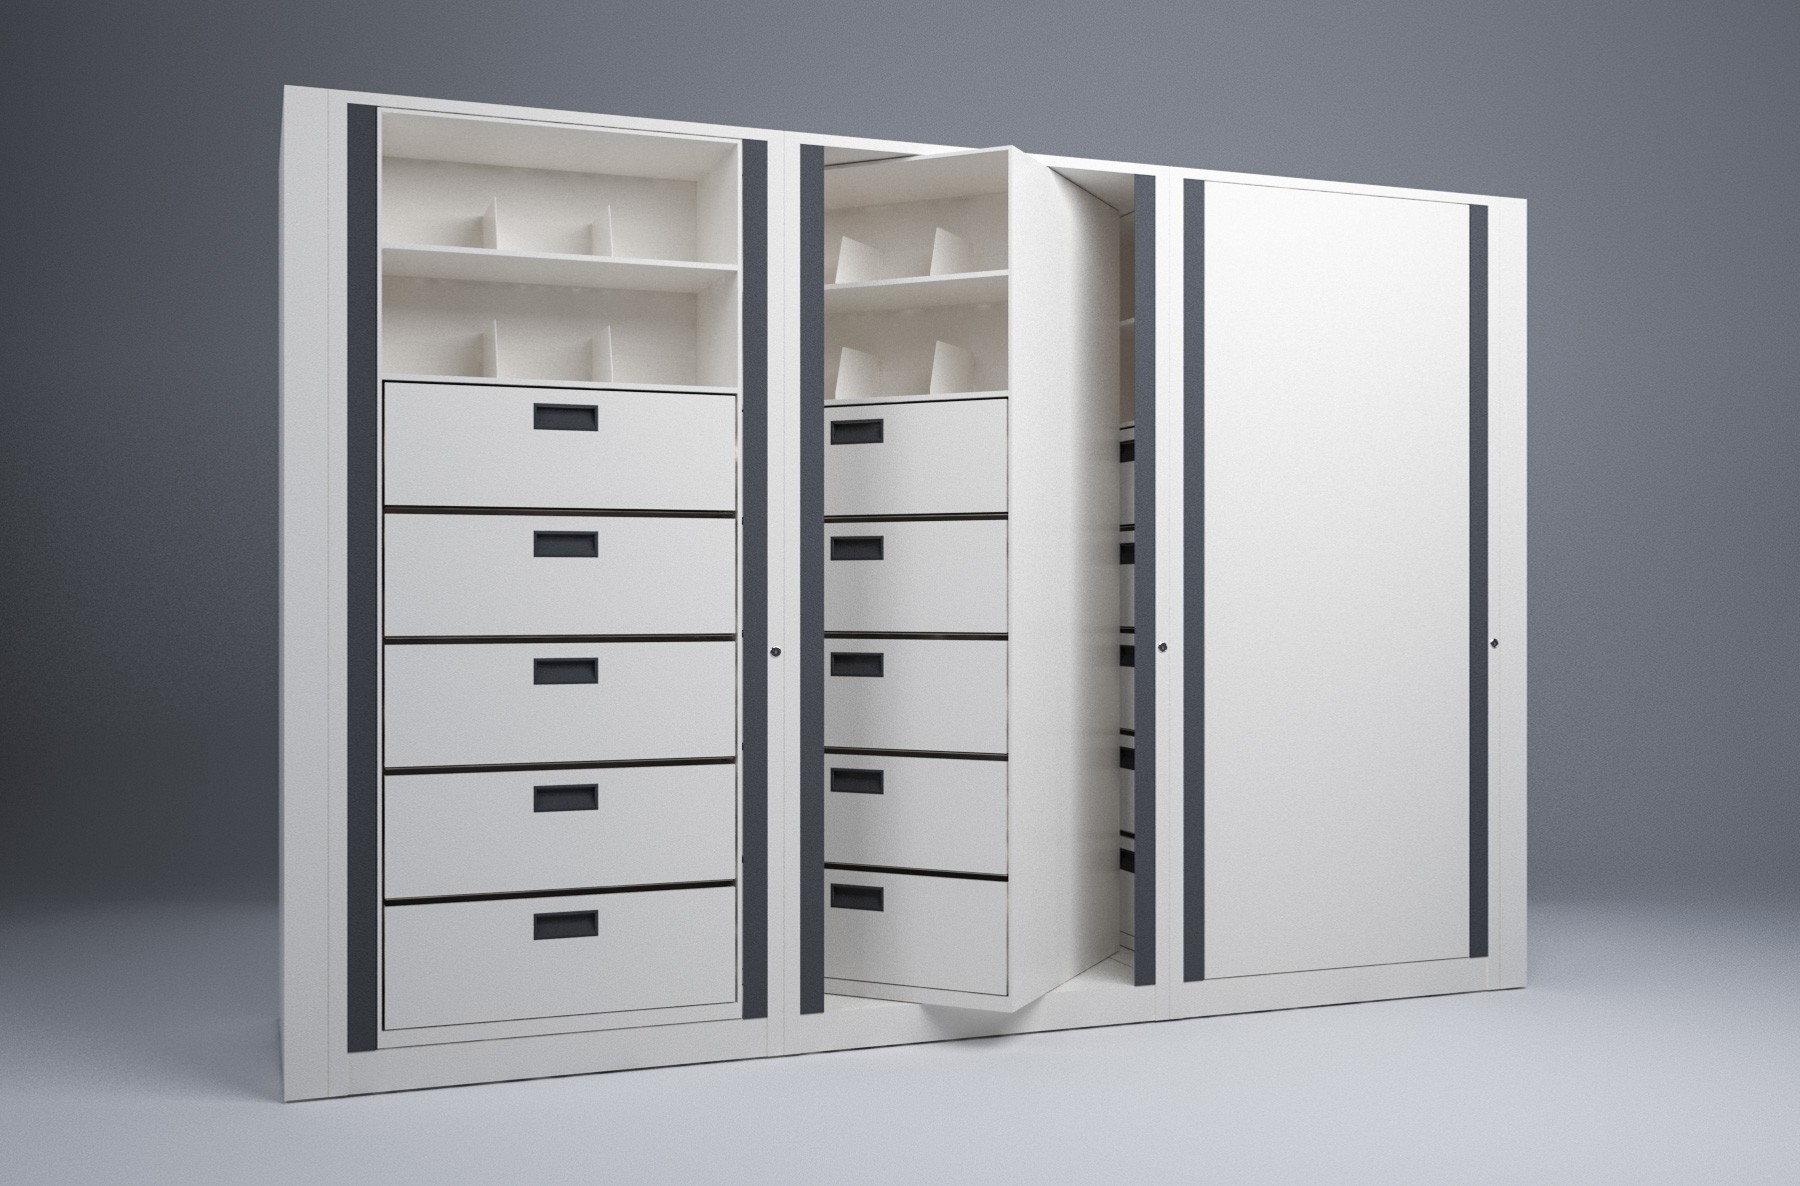 Legal-3 Cabinets-7 Tier-Drawers Steel Rotary File